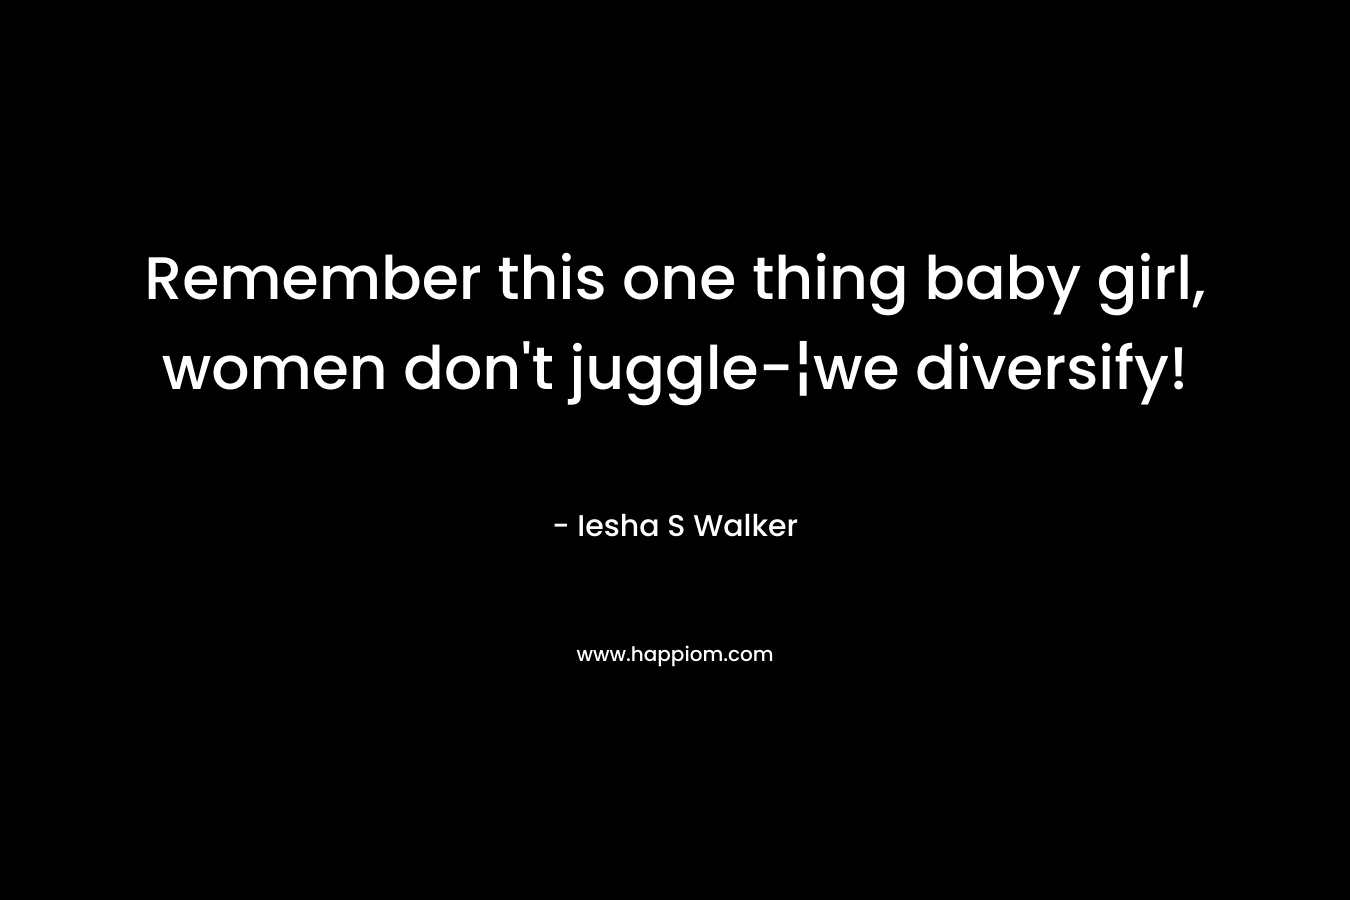 Remember this one thing baby girl, women don't juggle-¦we diversify!